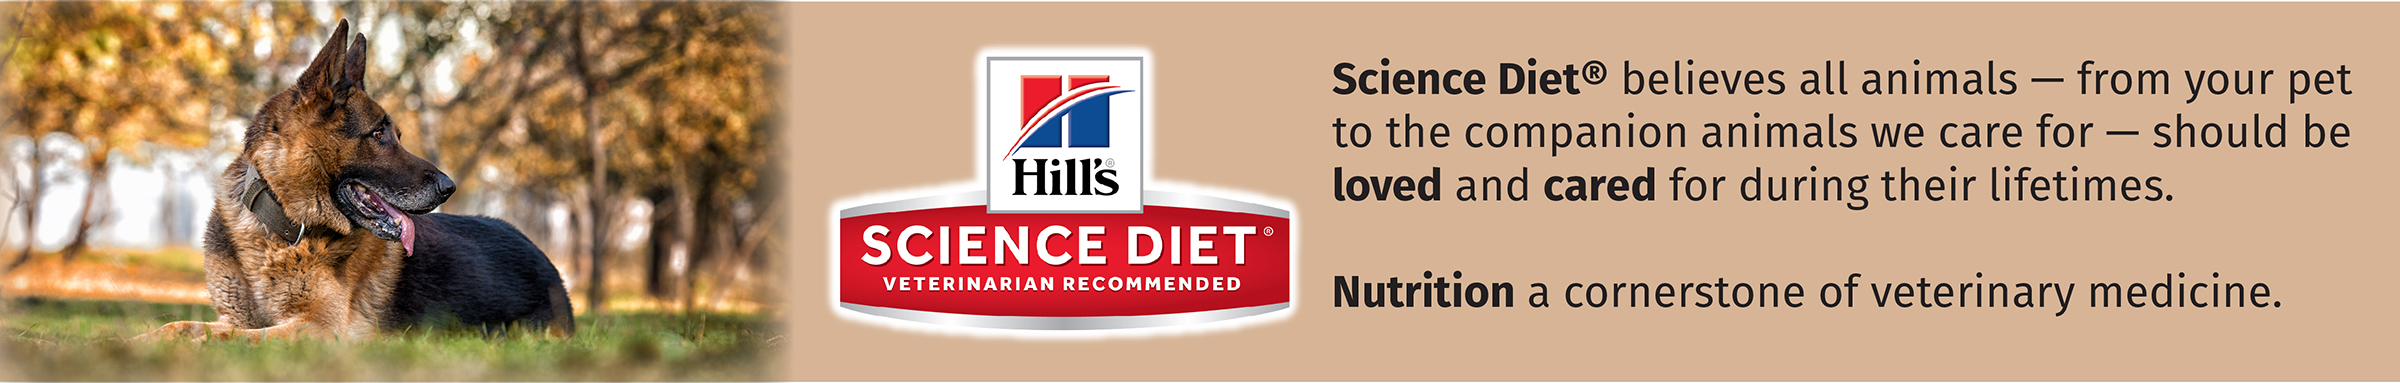 Science Diet Search Results